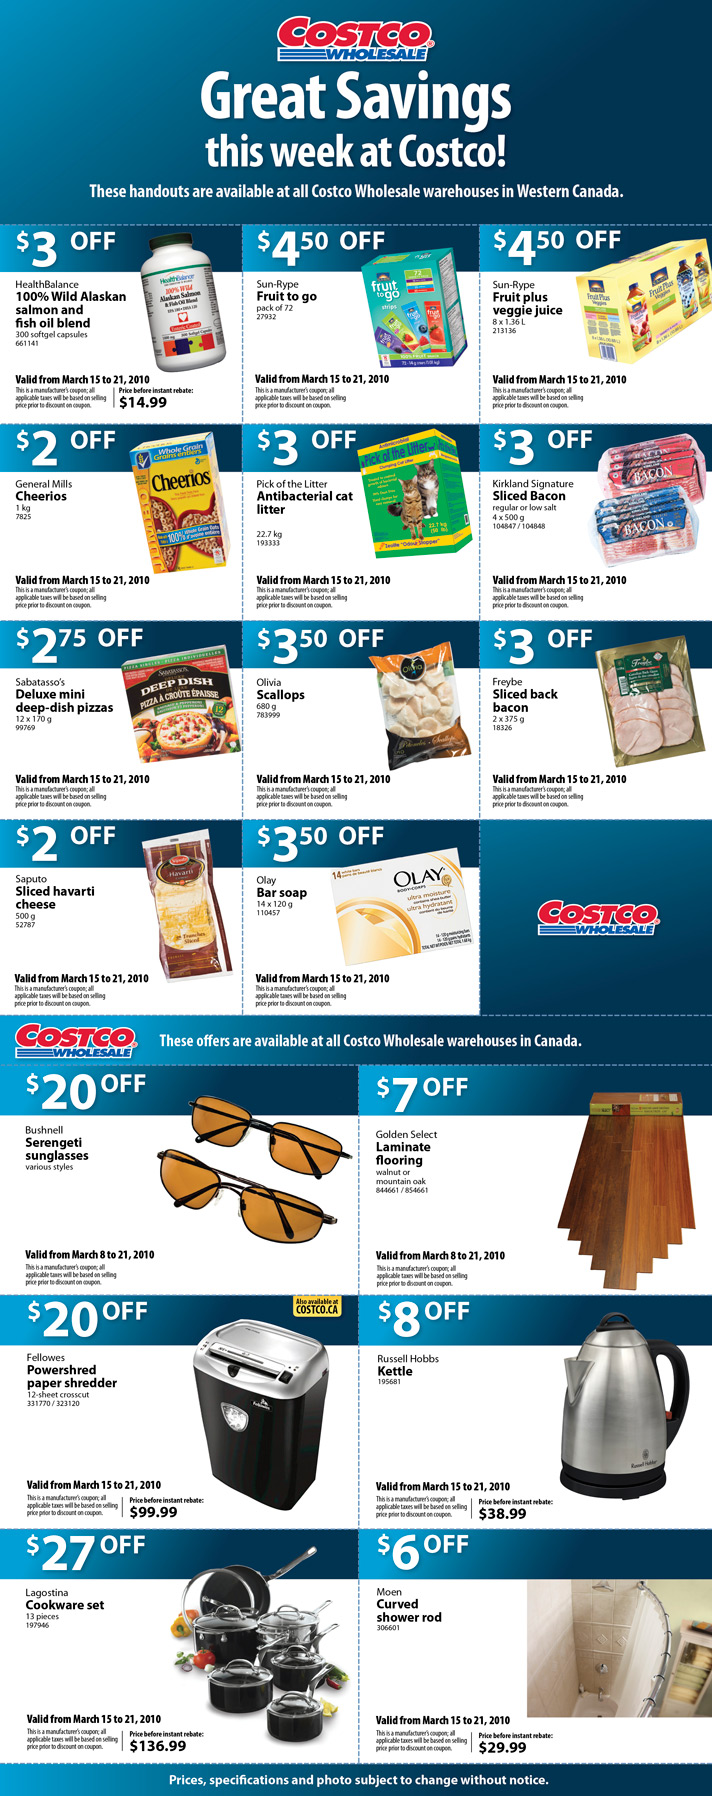 costco-instant-savings-coupons-march-15-21-2010-canadian